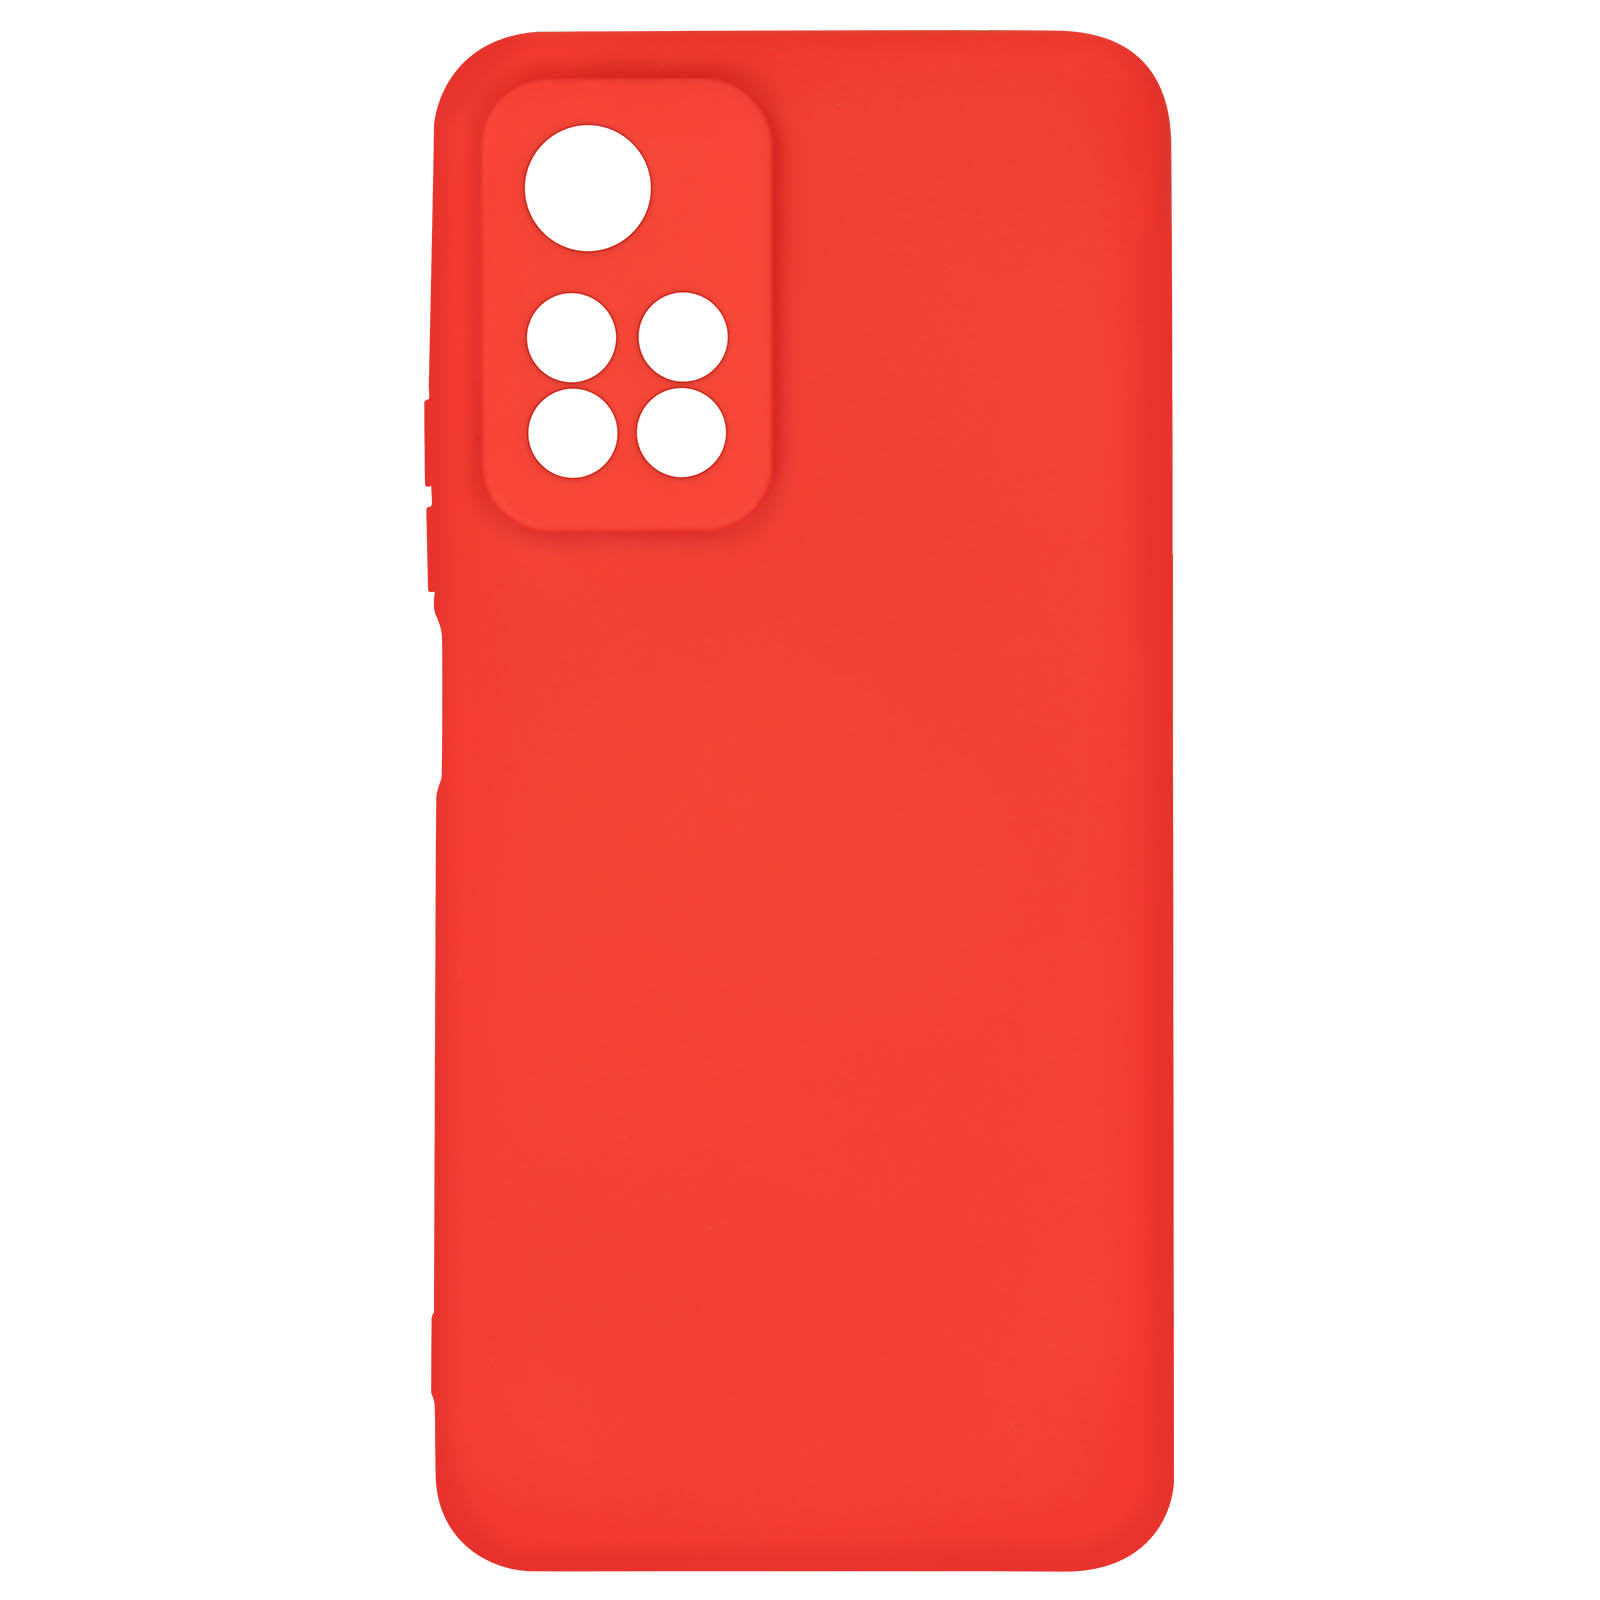 Soft Redmi Handyhülle Rot Pro Plus, 11 Xiaomi, AVIZAR Touch Note Series, Backcover,